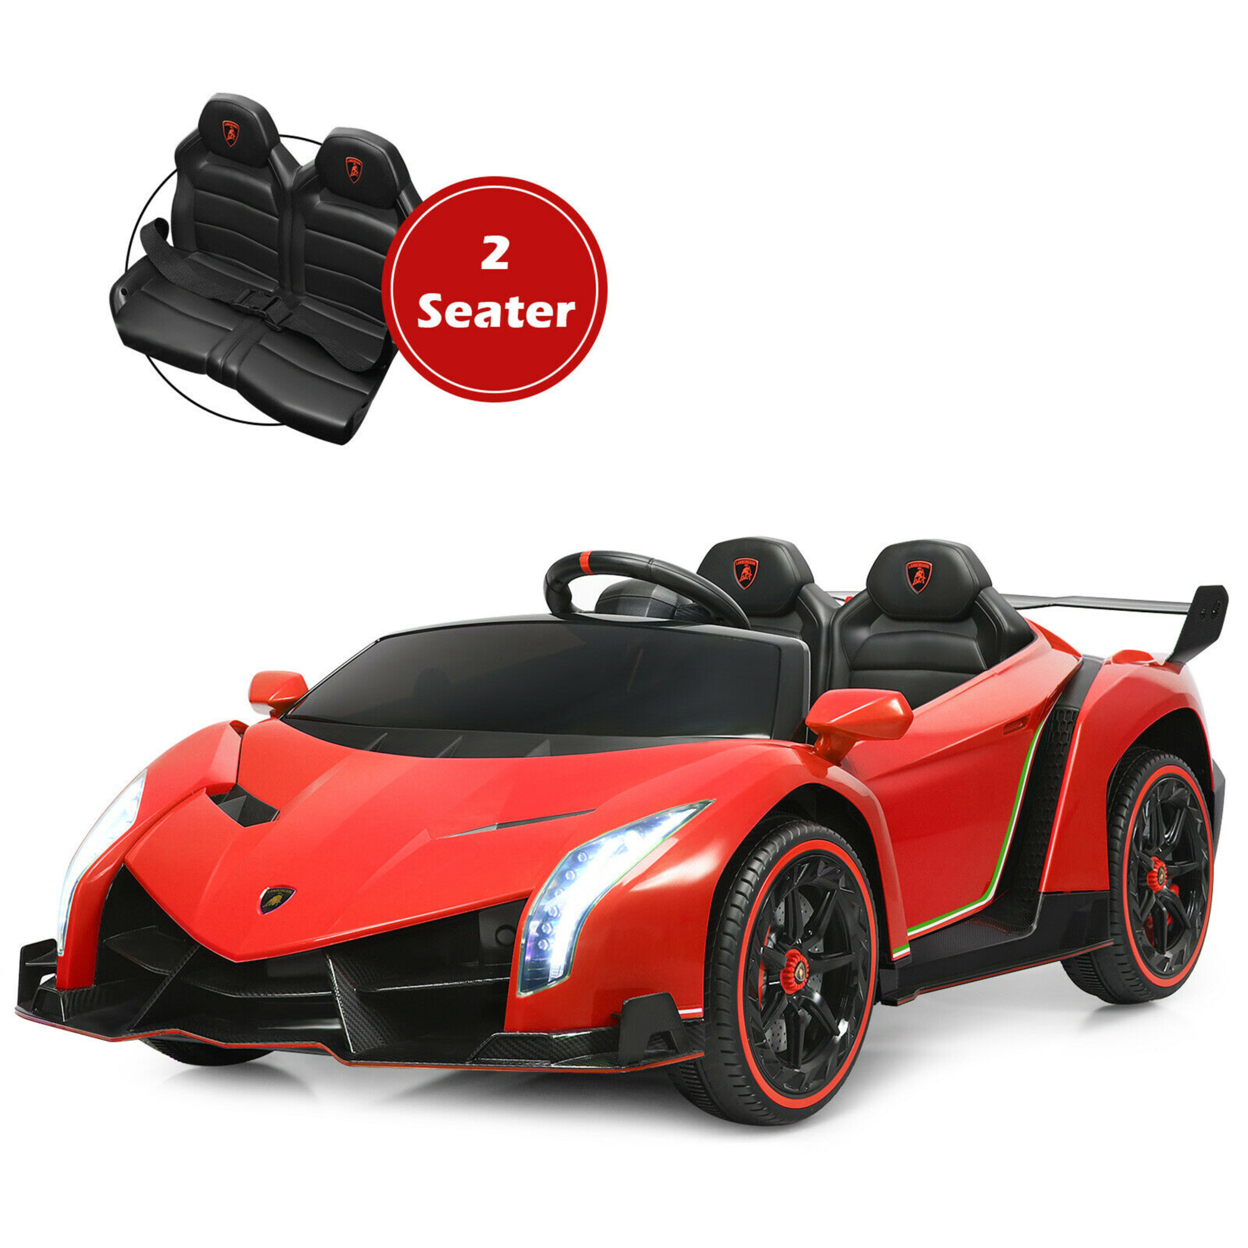 12V 2-Seater Licensed Lamborghini Kids Ride On Car W/ RC & Swing Function - Red